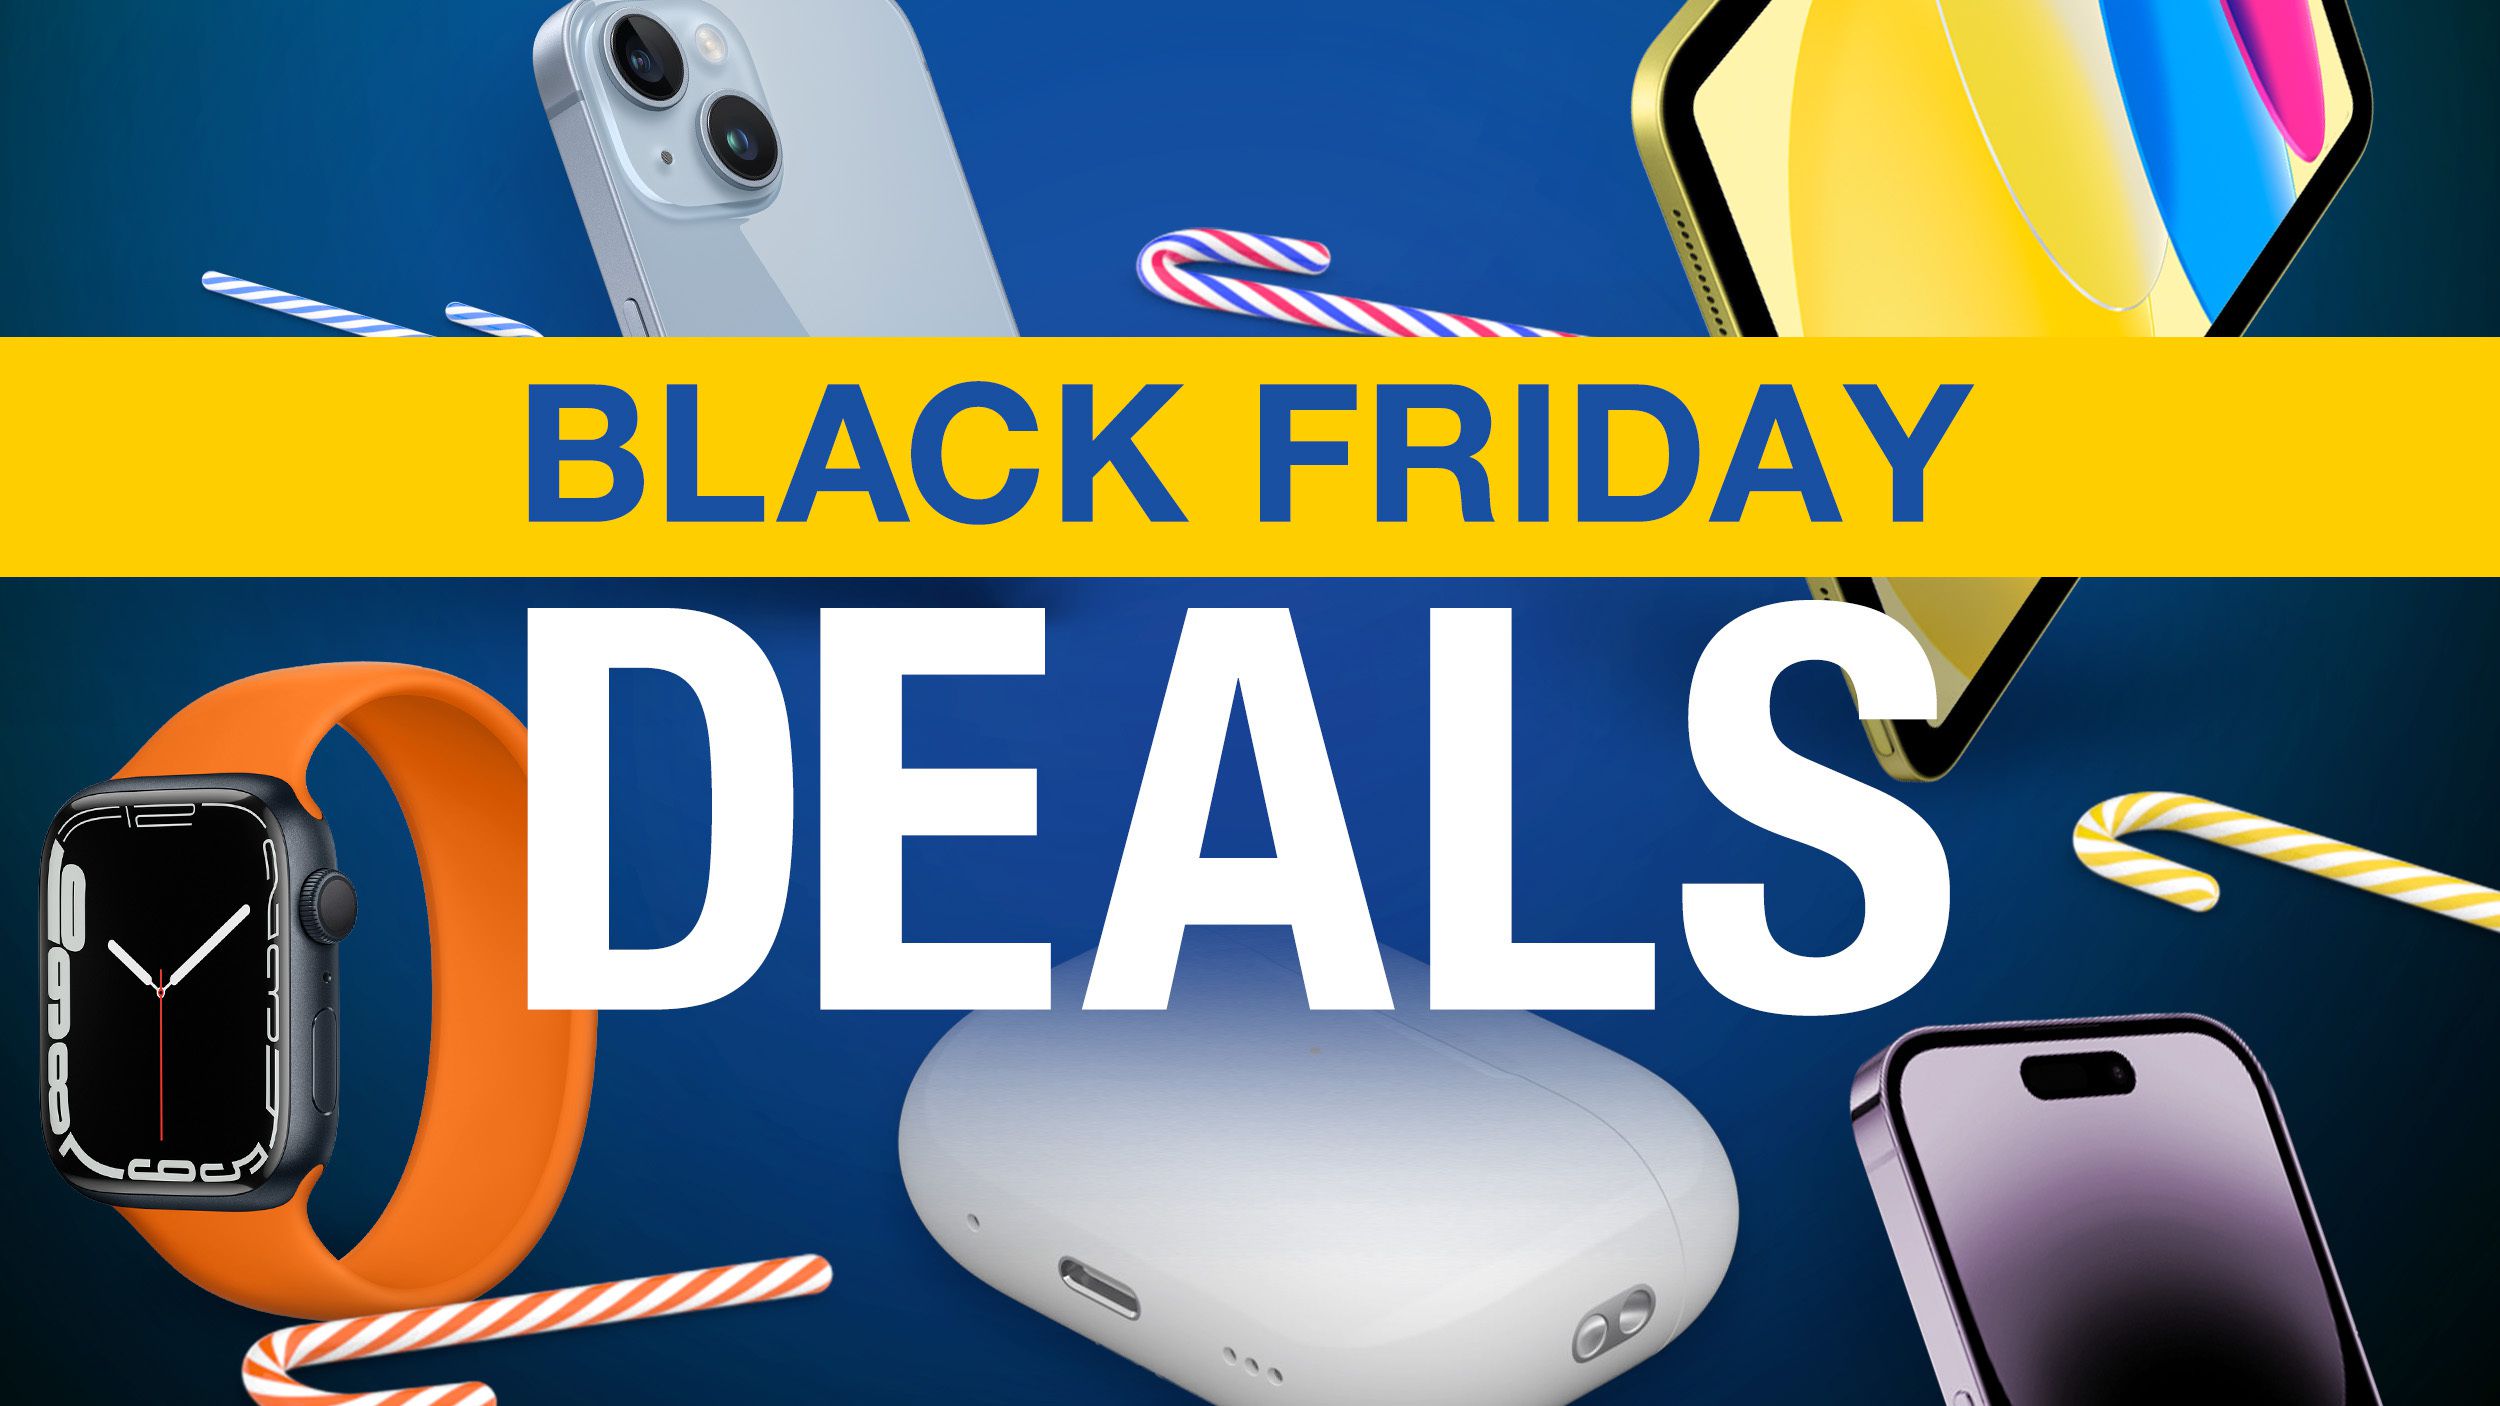 Apple Black Friday Deals Available Now: AirPods, iPhone, iPad, and More thumbnail